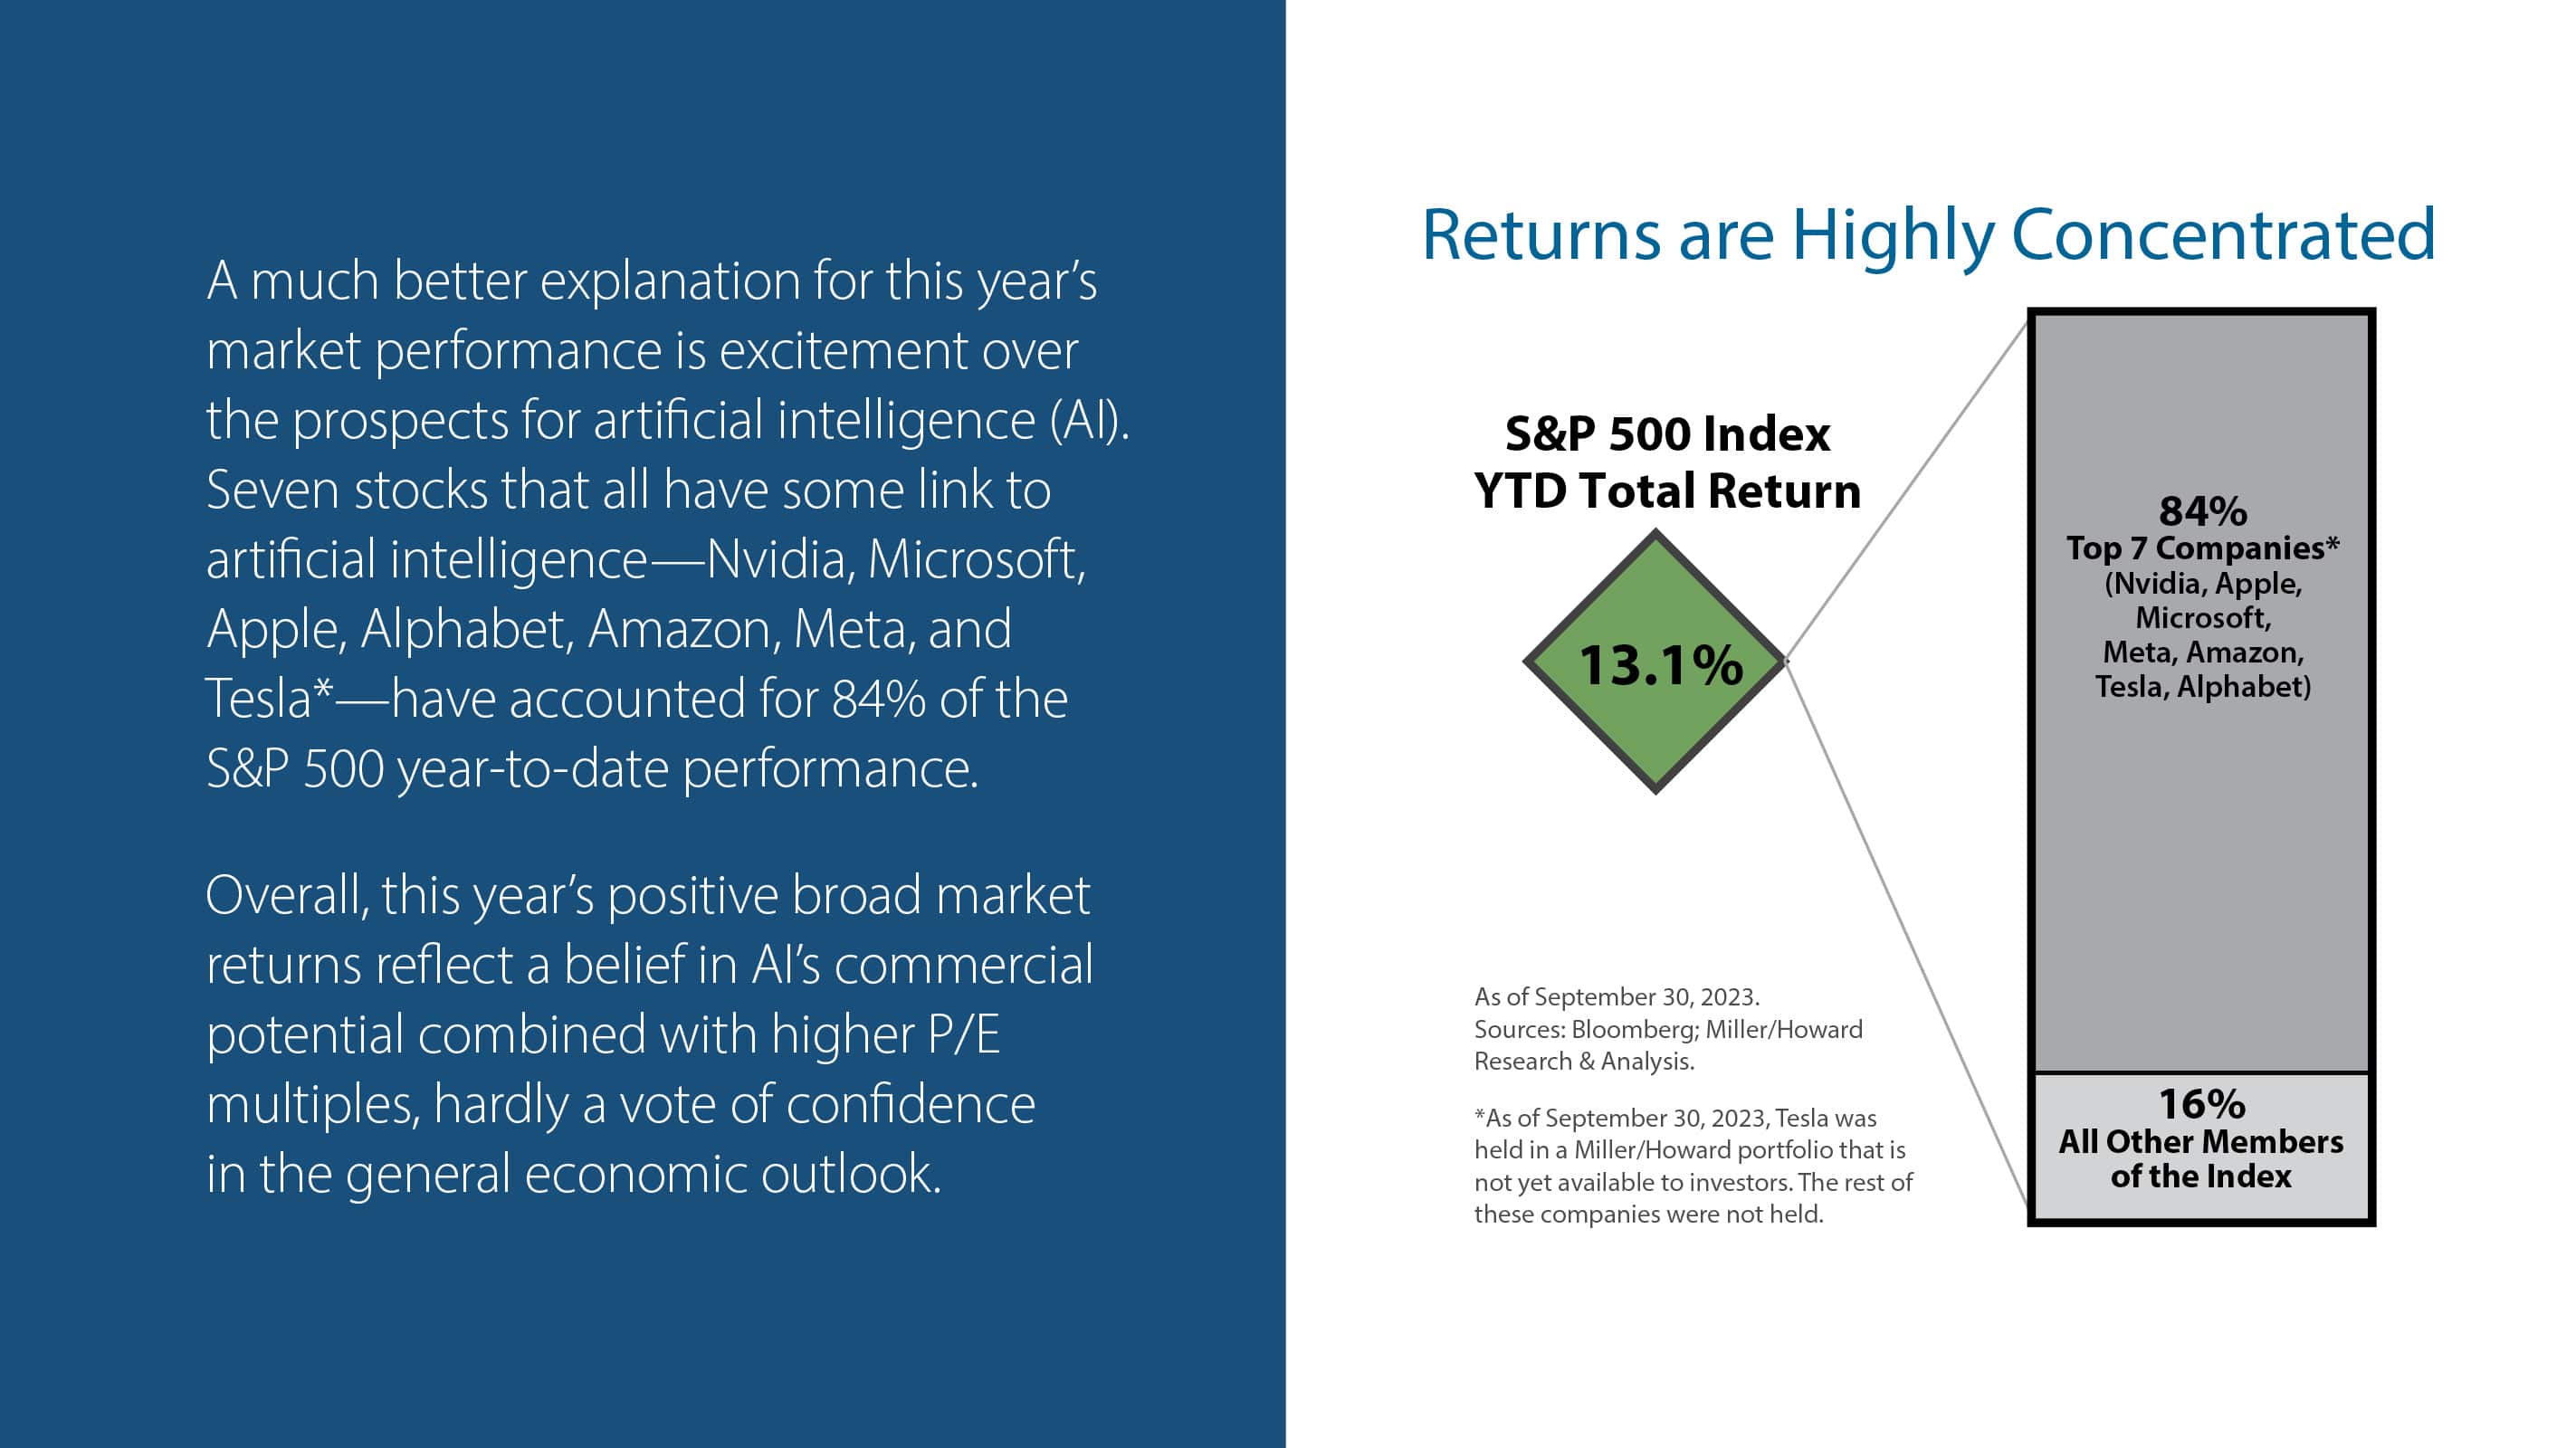 Returns are Highly Concentrated